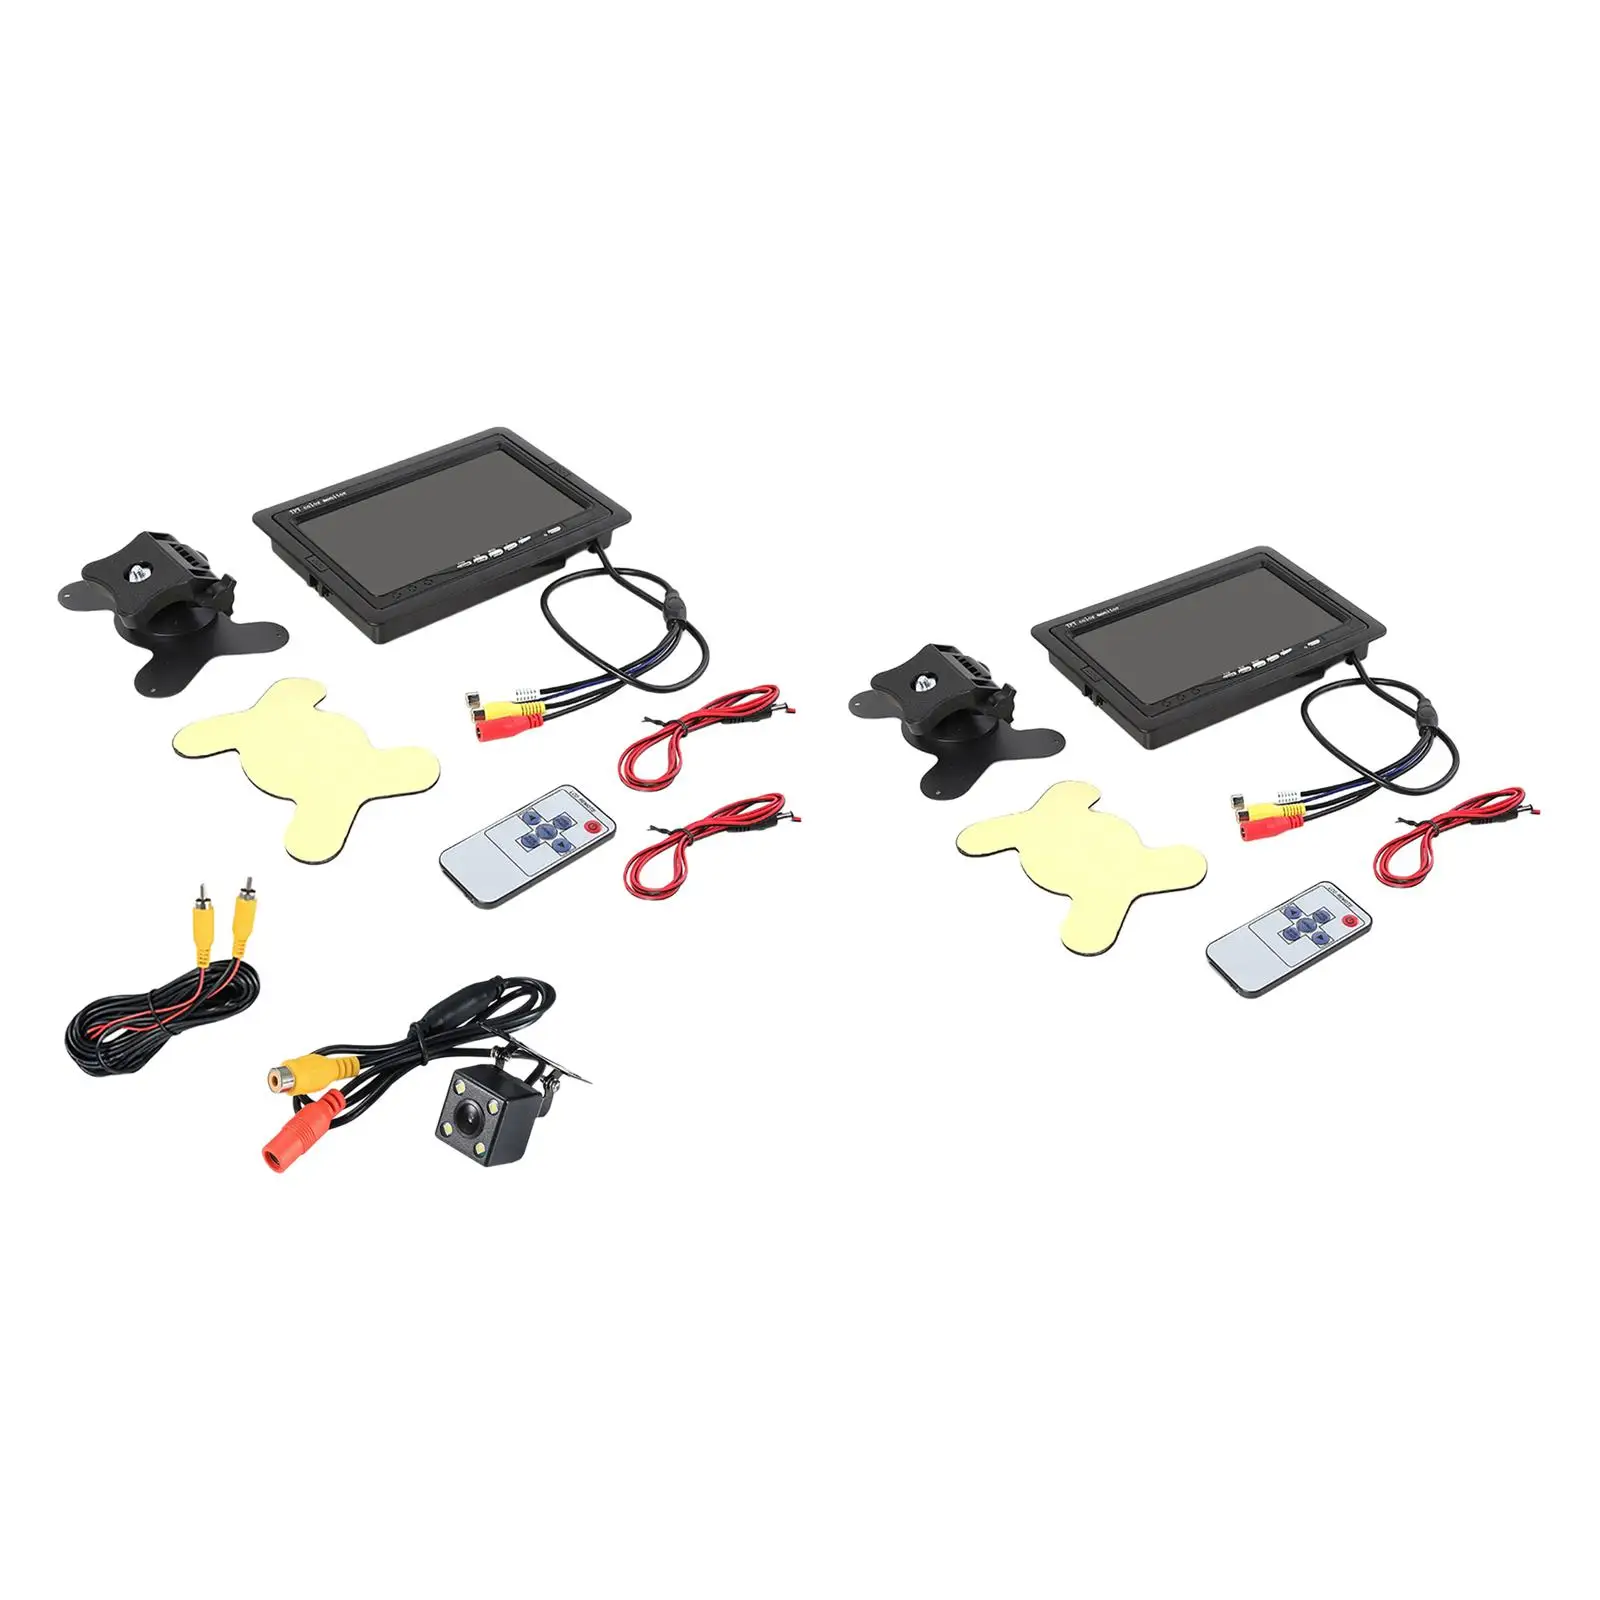 7Inches HD Car Rearview Display Monitor Set up Reverse Ntsc PaL TV DC 12V-24V Truck Portable Vehicle Parking Assist Kit